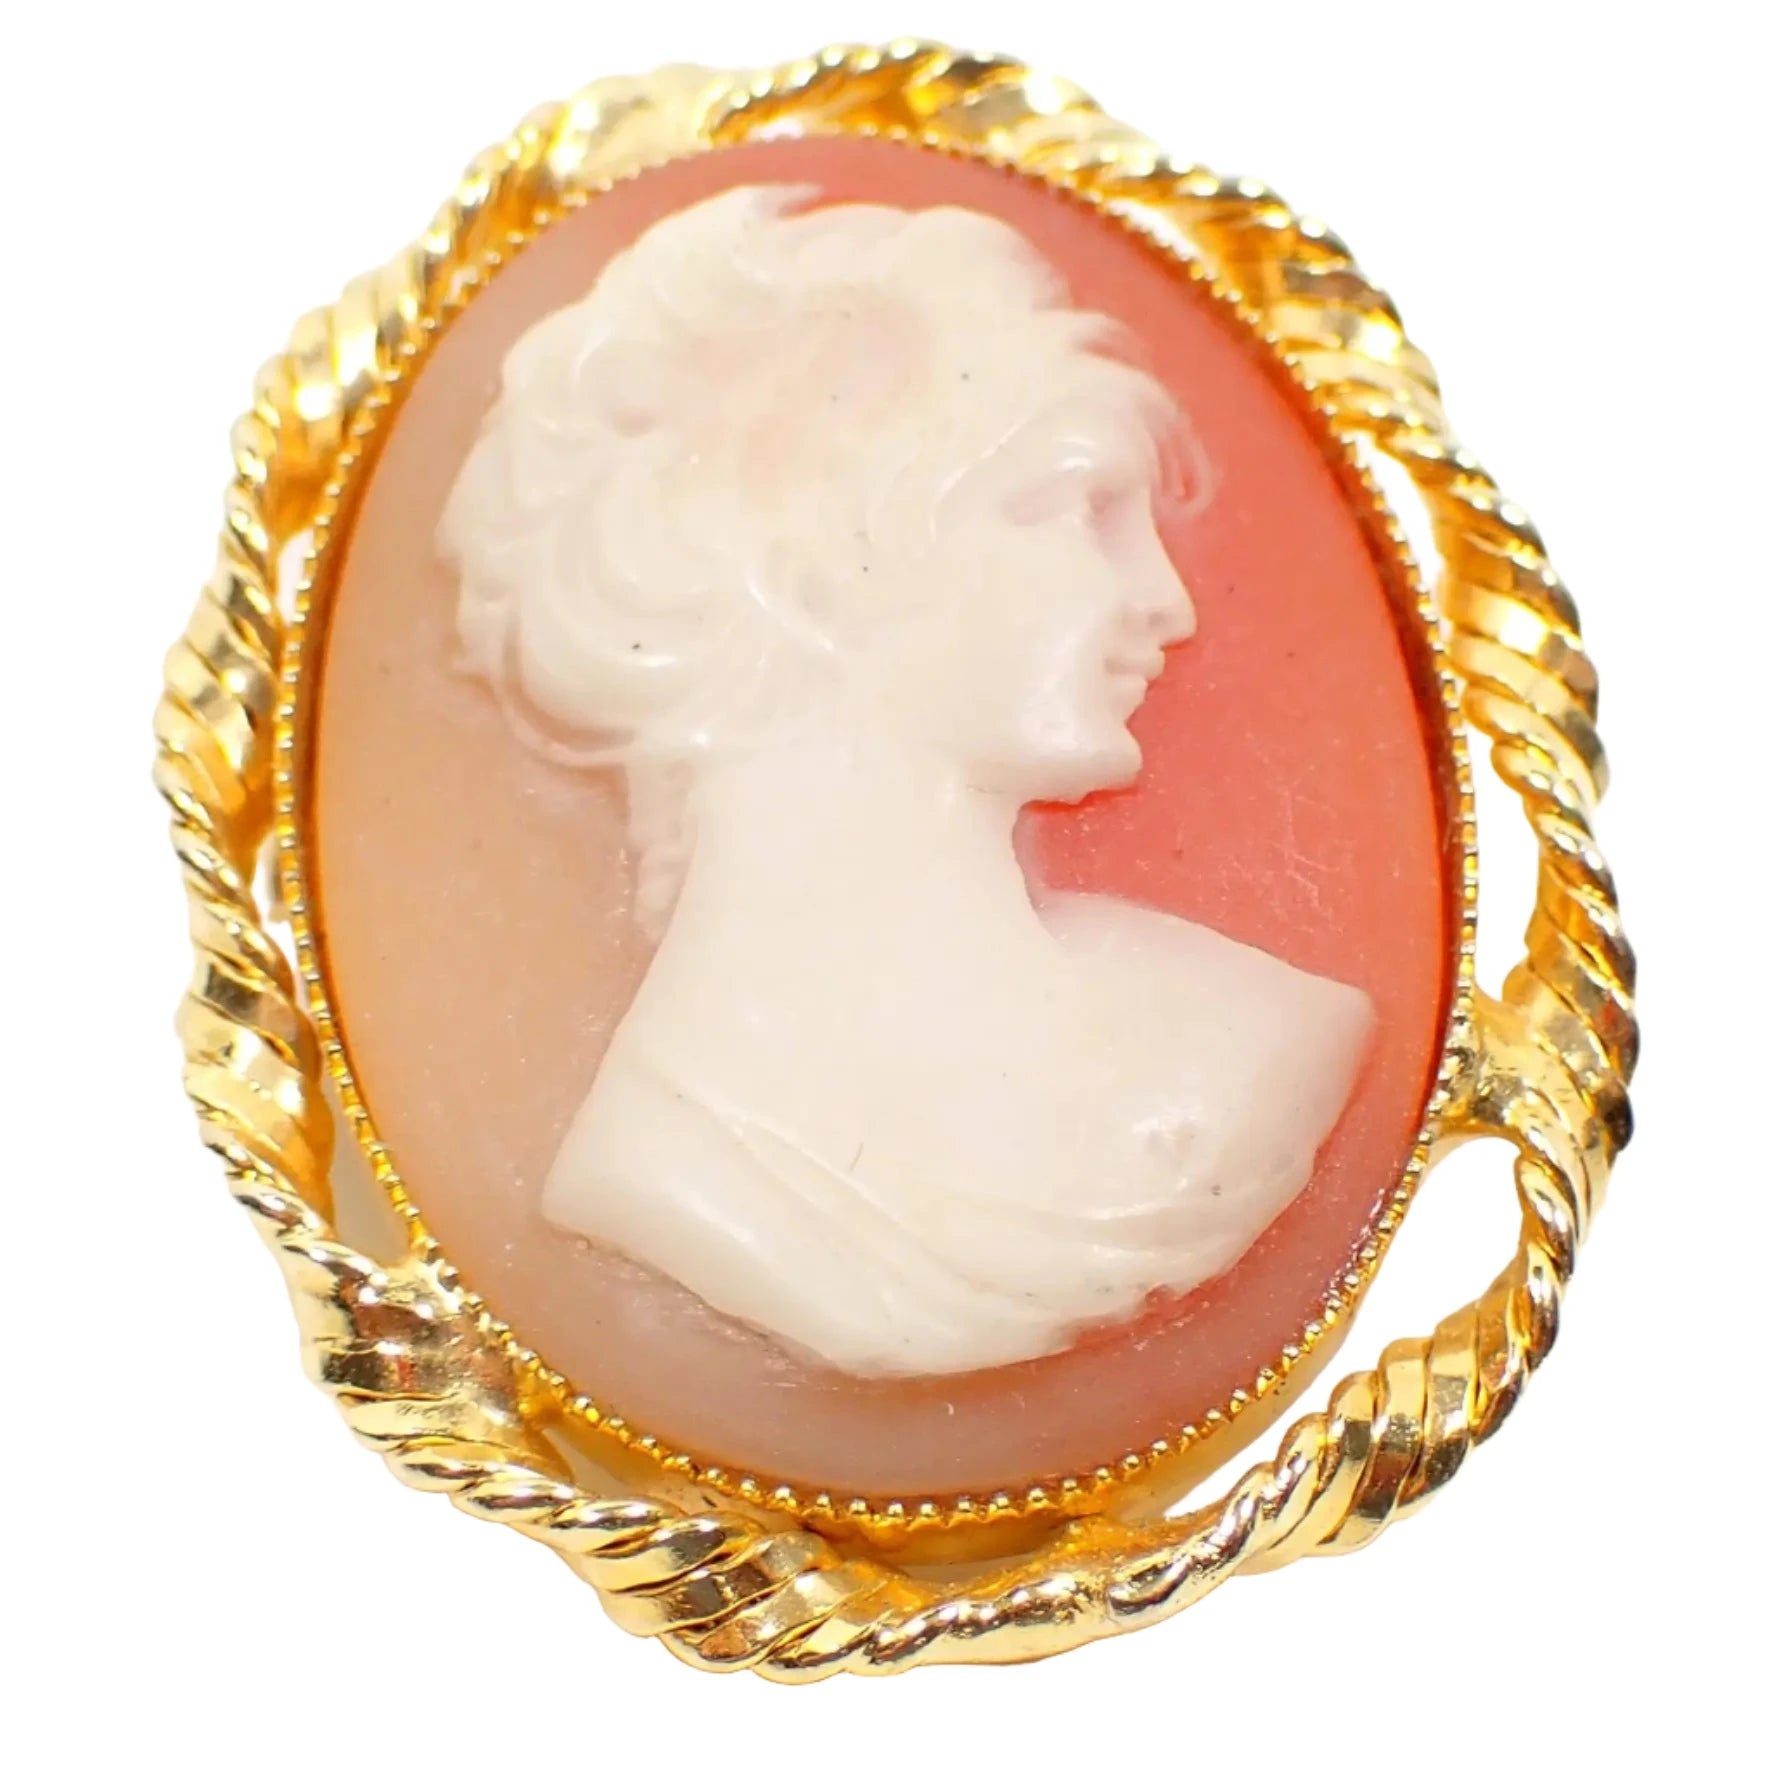 Enlarged front view of the retro vintage molded plastic cameo brooch. The setting is gold tone and has a twisted design around the edge. It is oval in shape with a bust of a woman on the front. The background goes from light peach to a salmon pink in color.